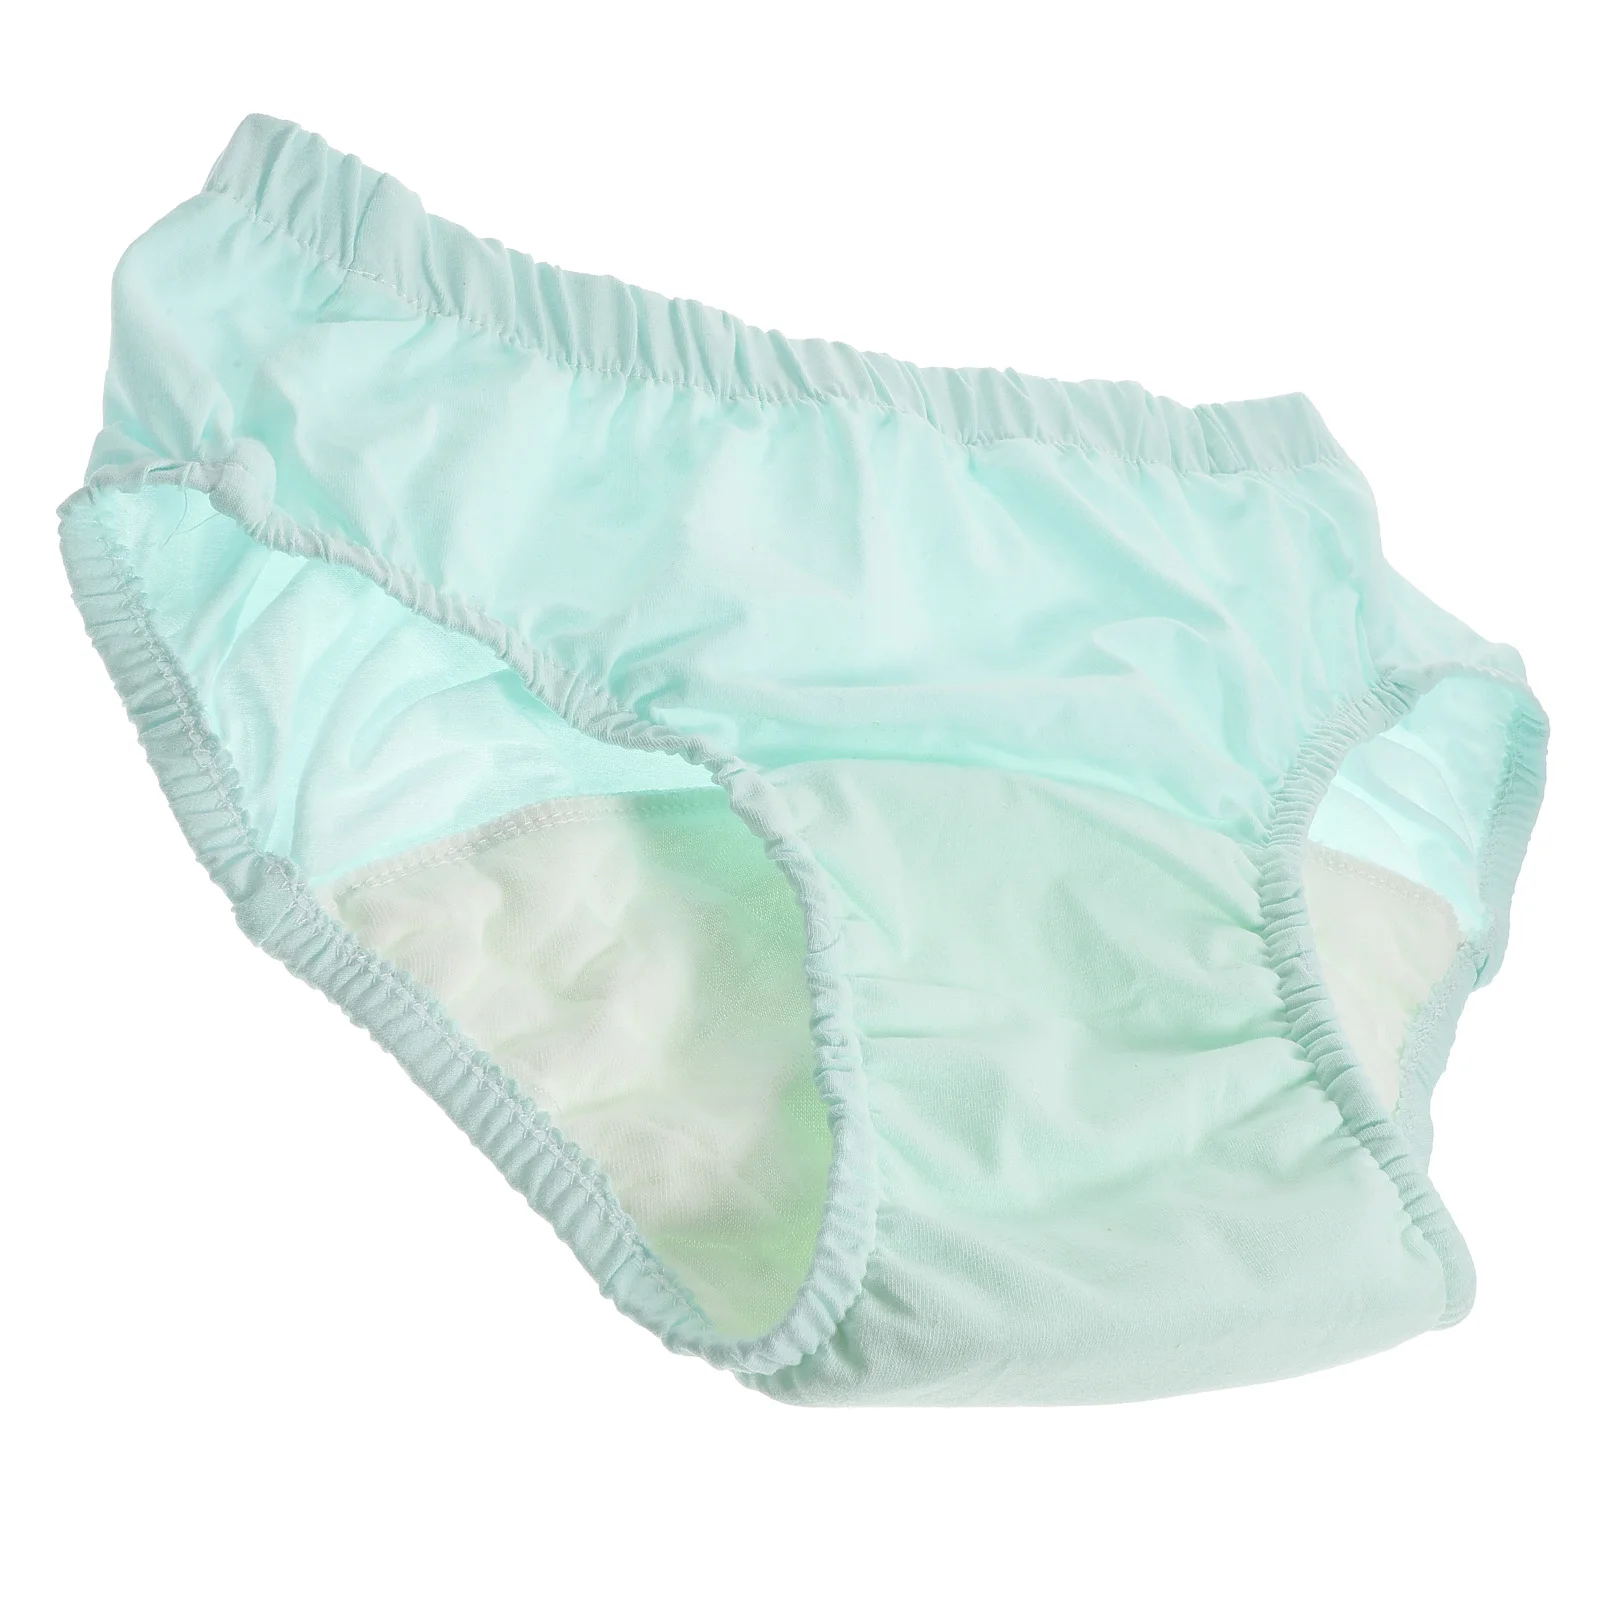 

Diaper Adult Incontinence Diapers Elderly Nappy Pants Reusable Cloth Washable Old Man Briefs Disabled Adults Urinary Nappies